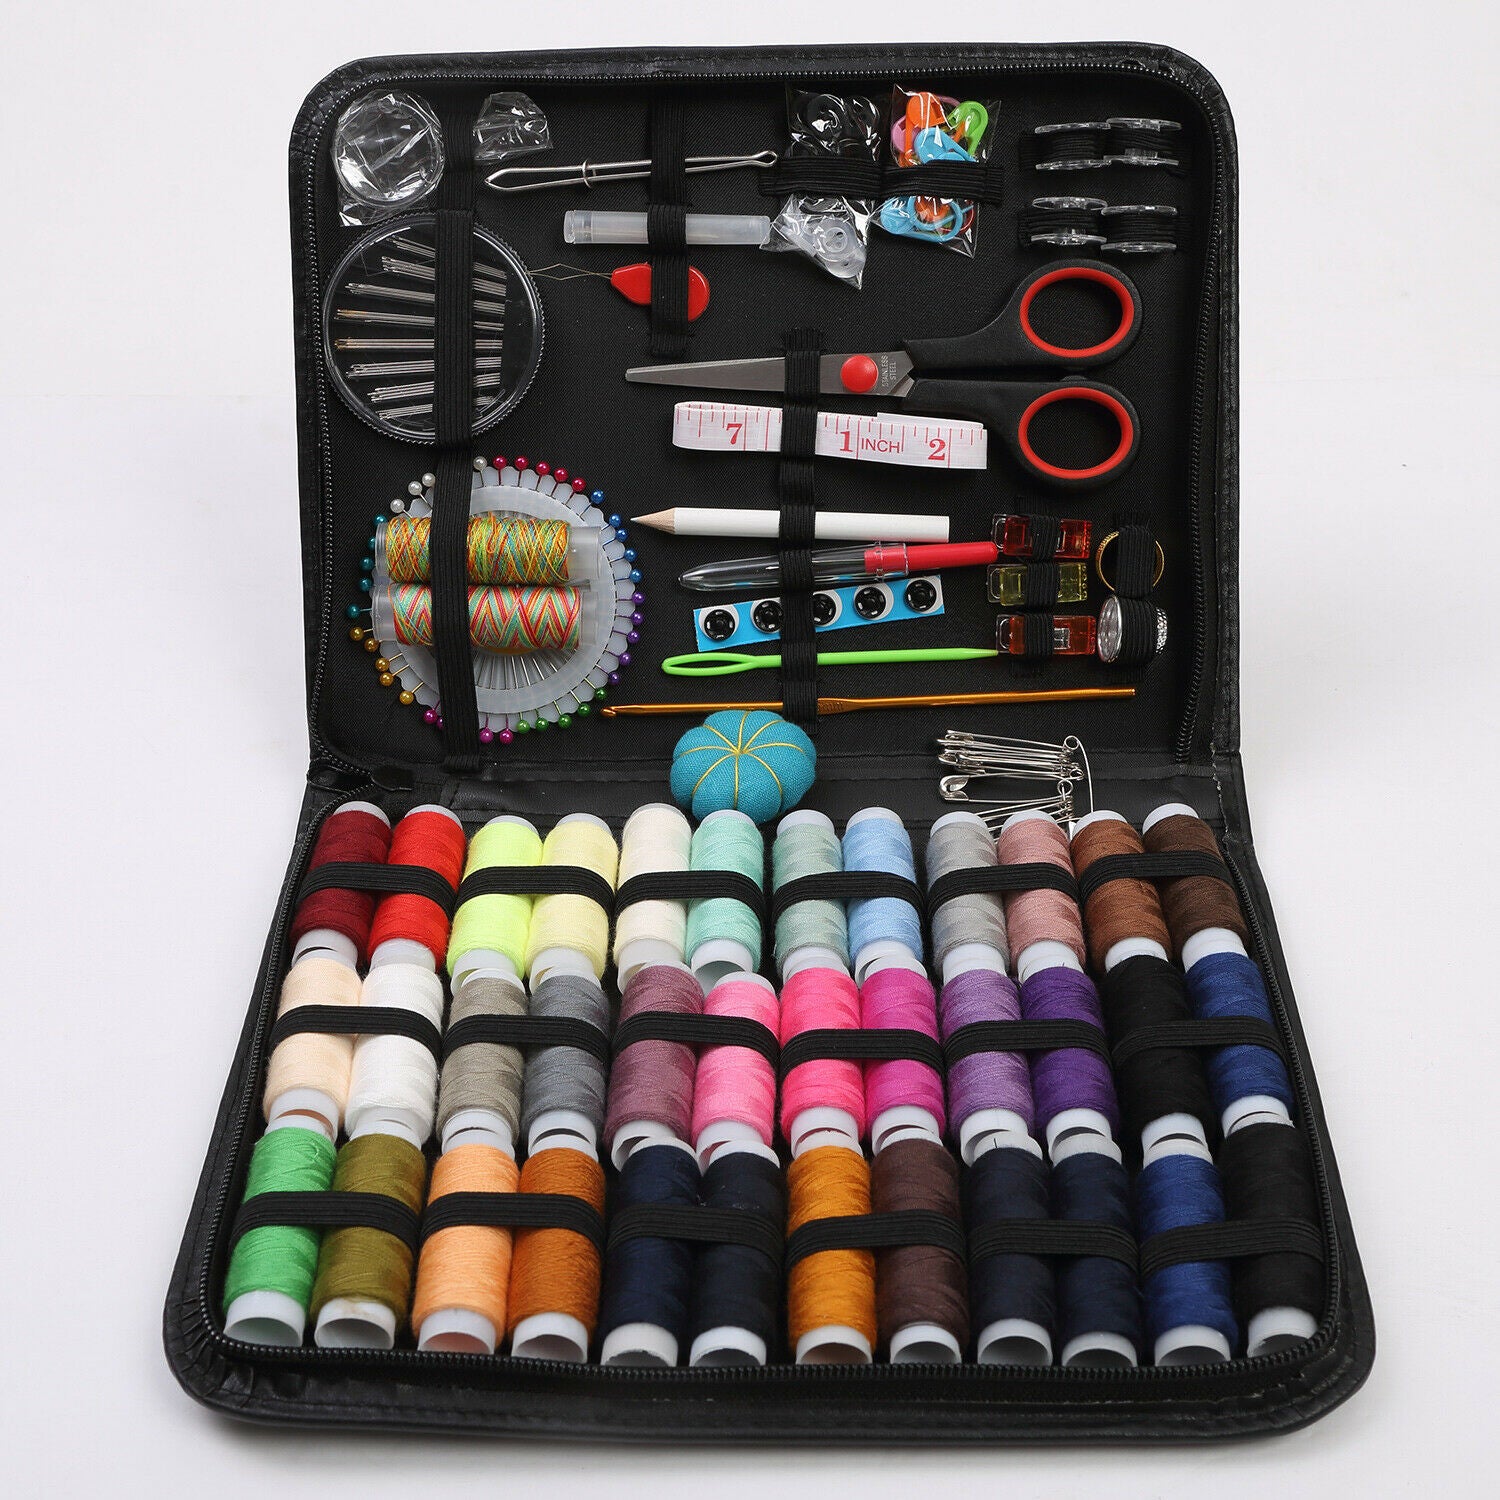 Velocity Clearance! Sewing Kit for Adults 200pcs Set of High-Quality Sewing Supplies 41 XL Spools, Portable Sewing Accessories for Beginners, Travelers